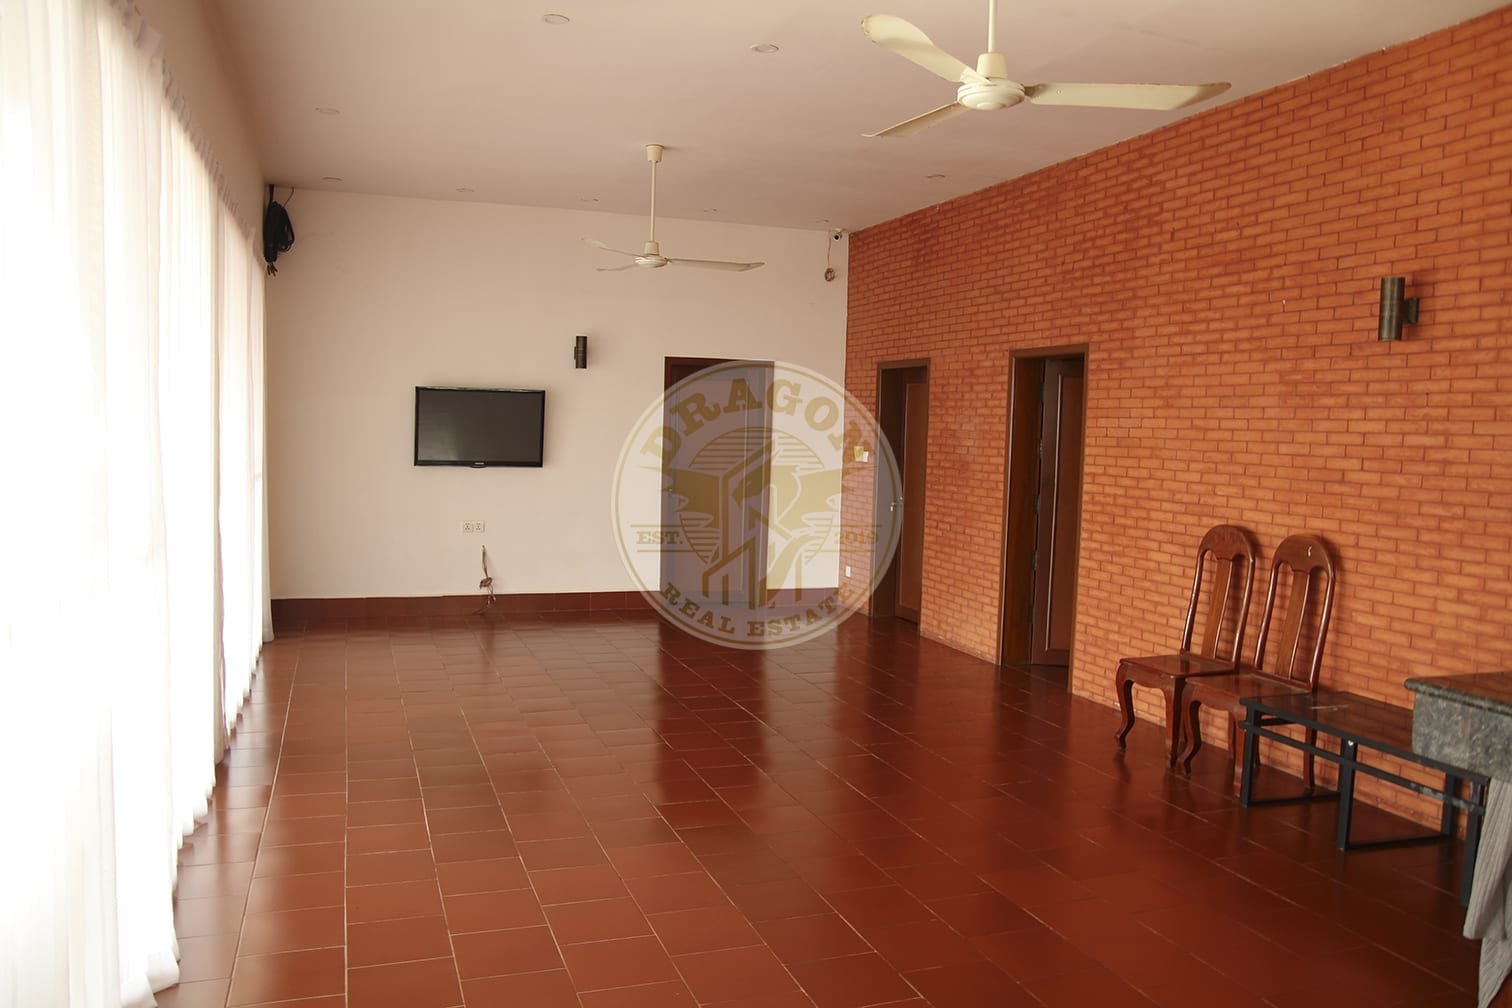 Villa 350m2 for Rent. Rooms for Rent in Sihanoukville Cambodia